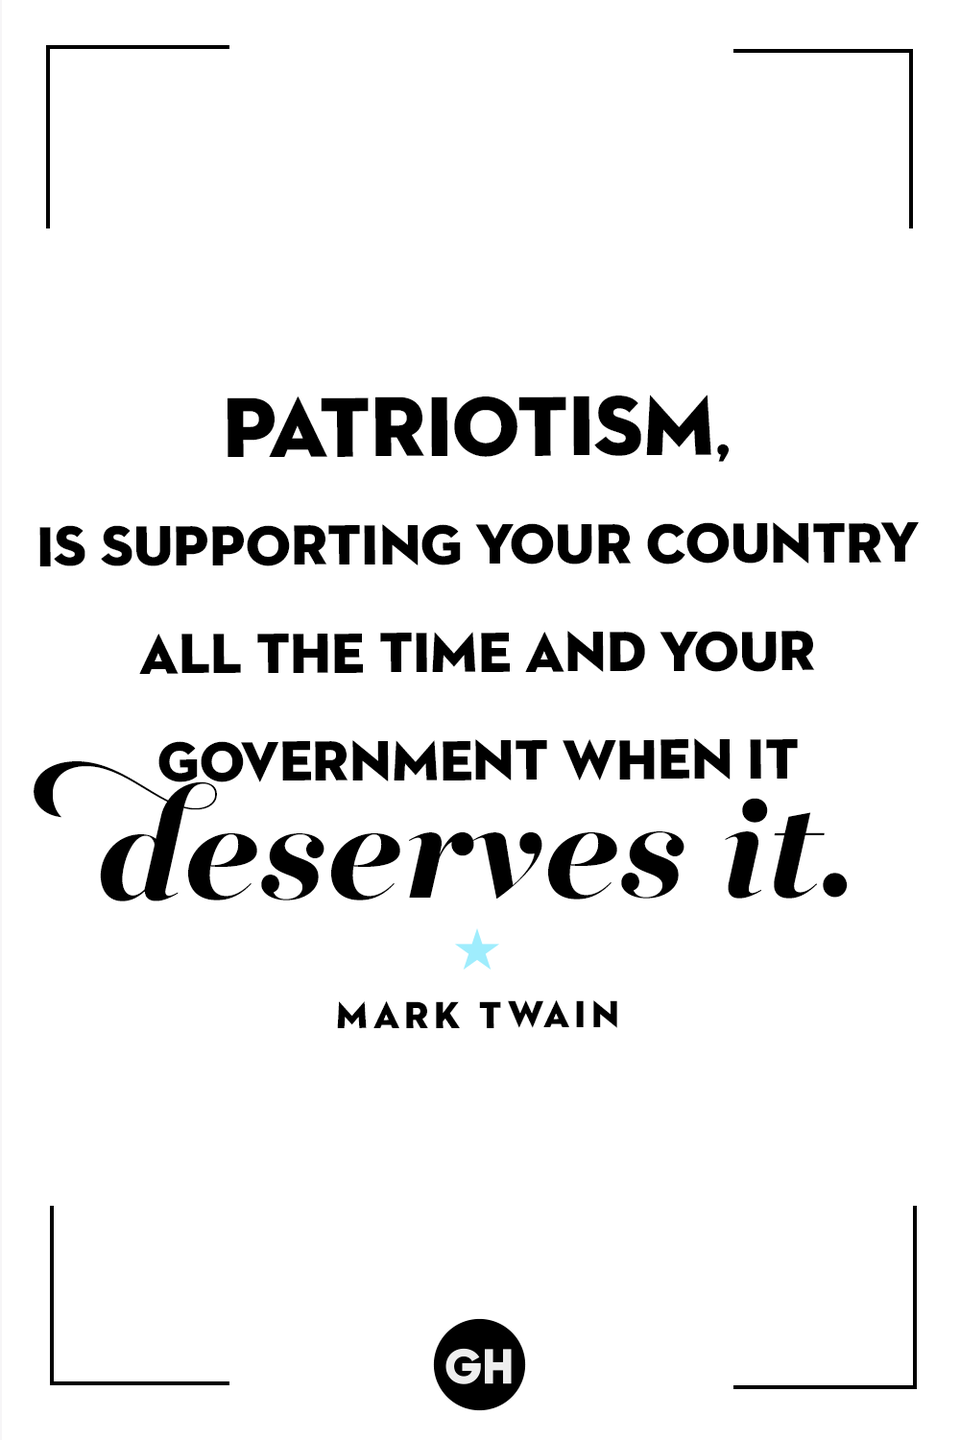 <p>"Patriotism is supporting your country all the time and your government when it deserves it."</p>